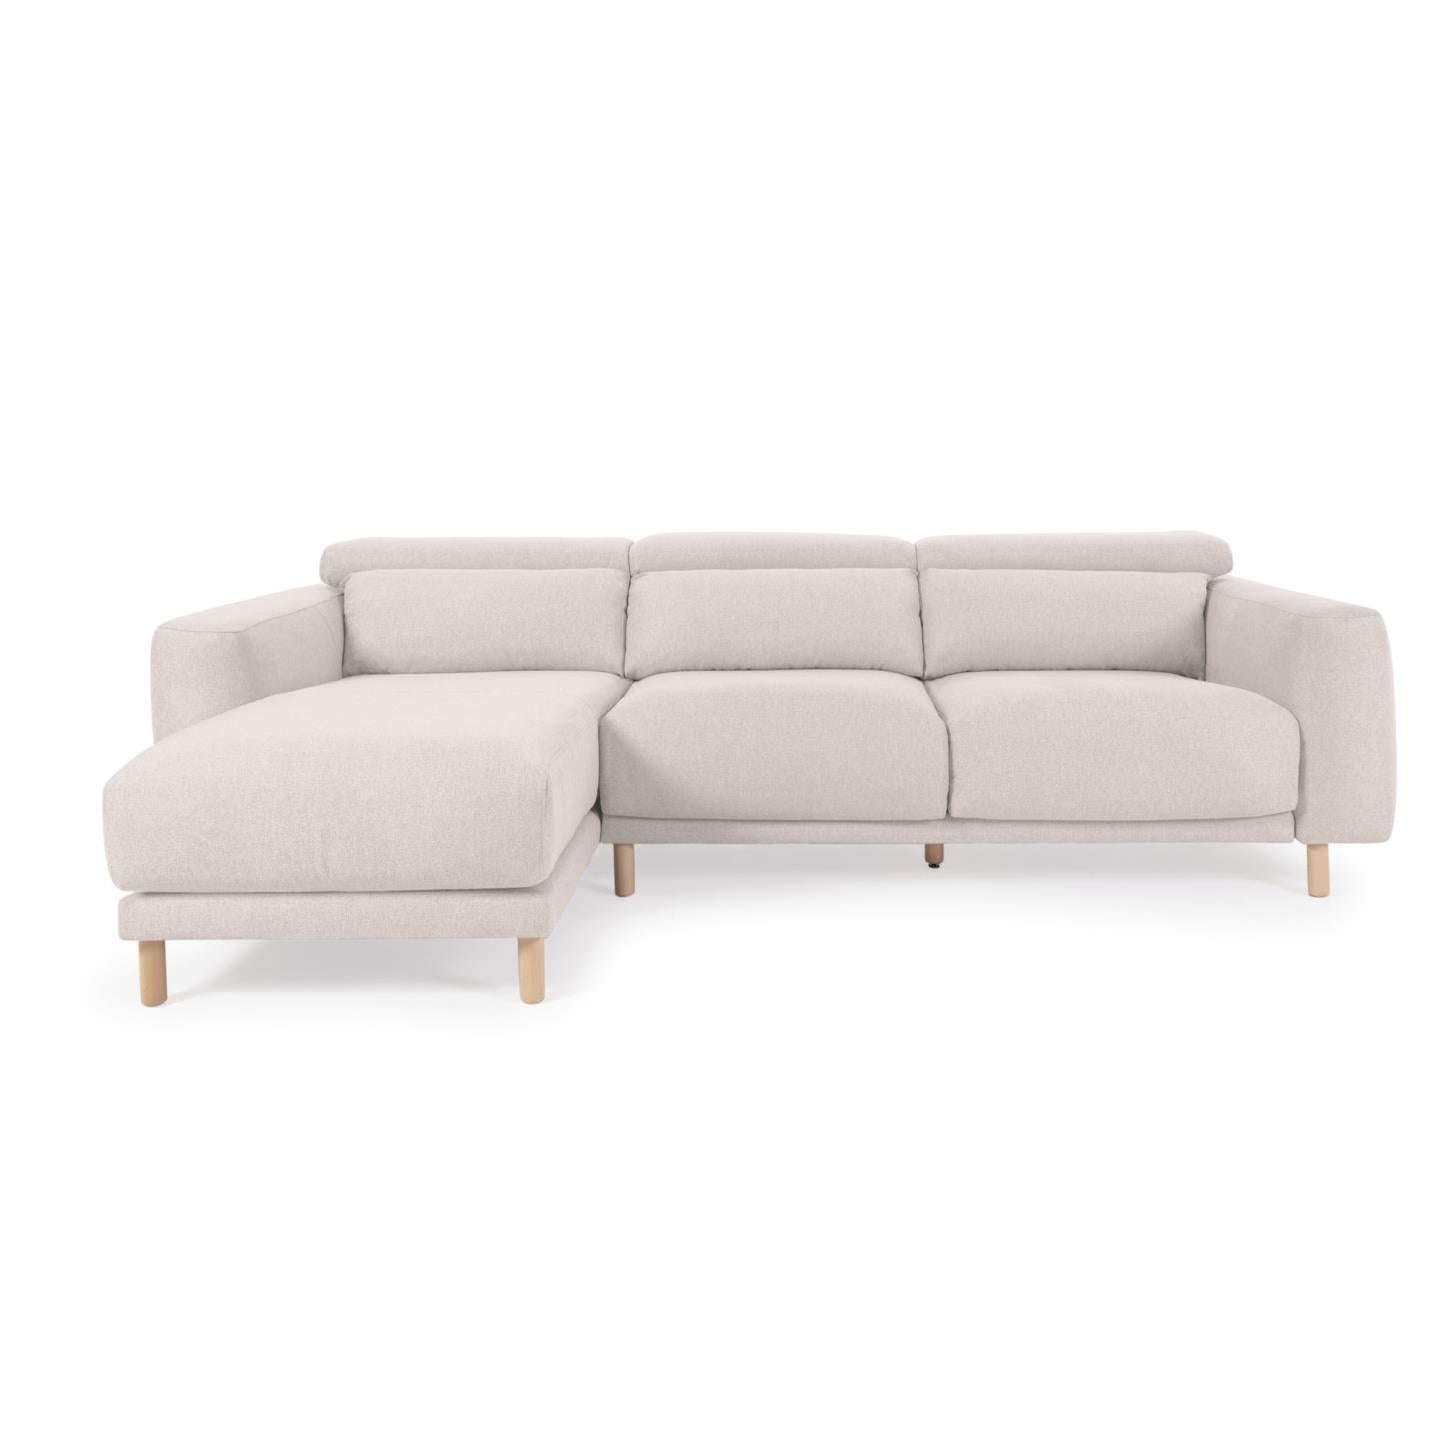 Singa 3 seater sofa with left-hand chaise longue in white, 296 cm